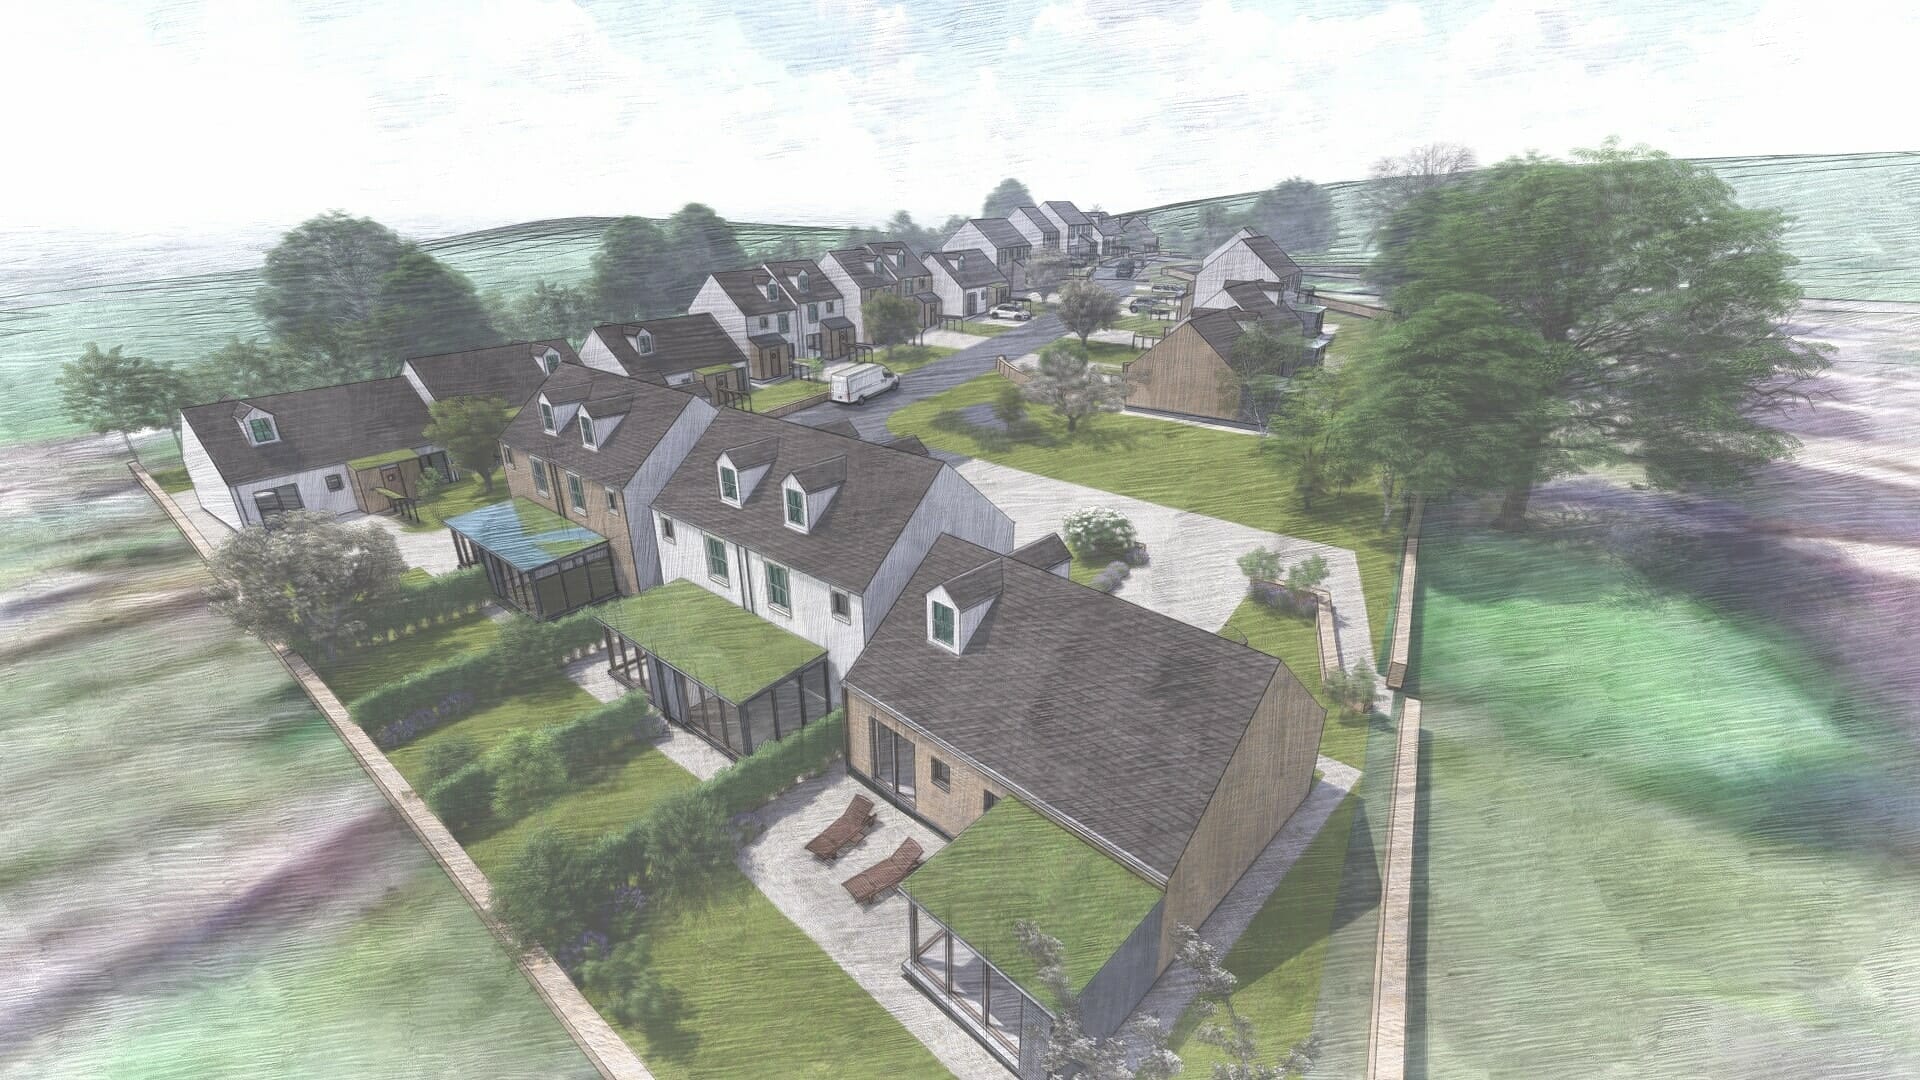 22 new homes for Kirkby Stephen given go-ahead 